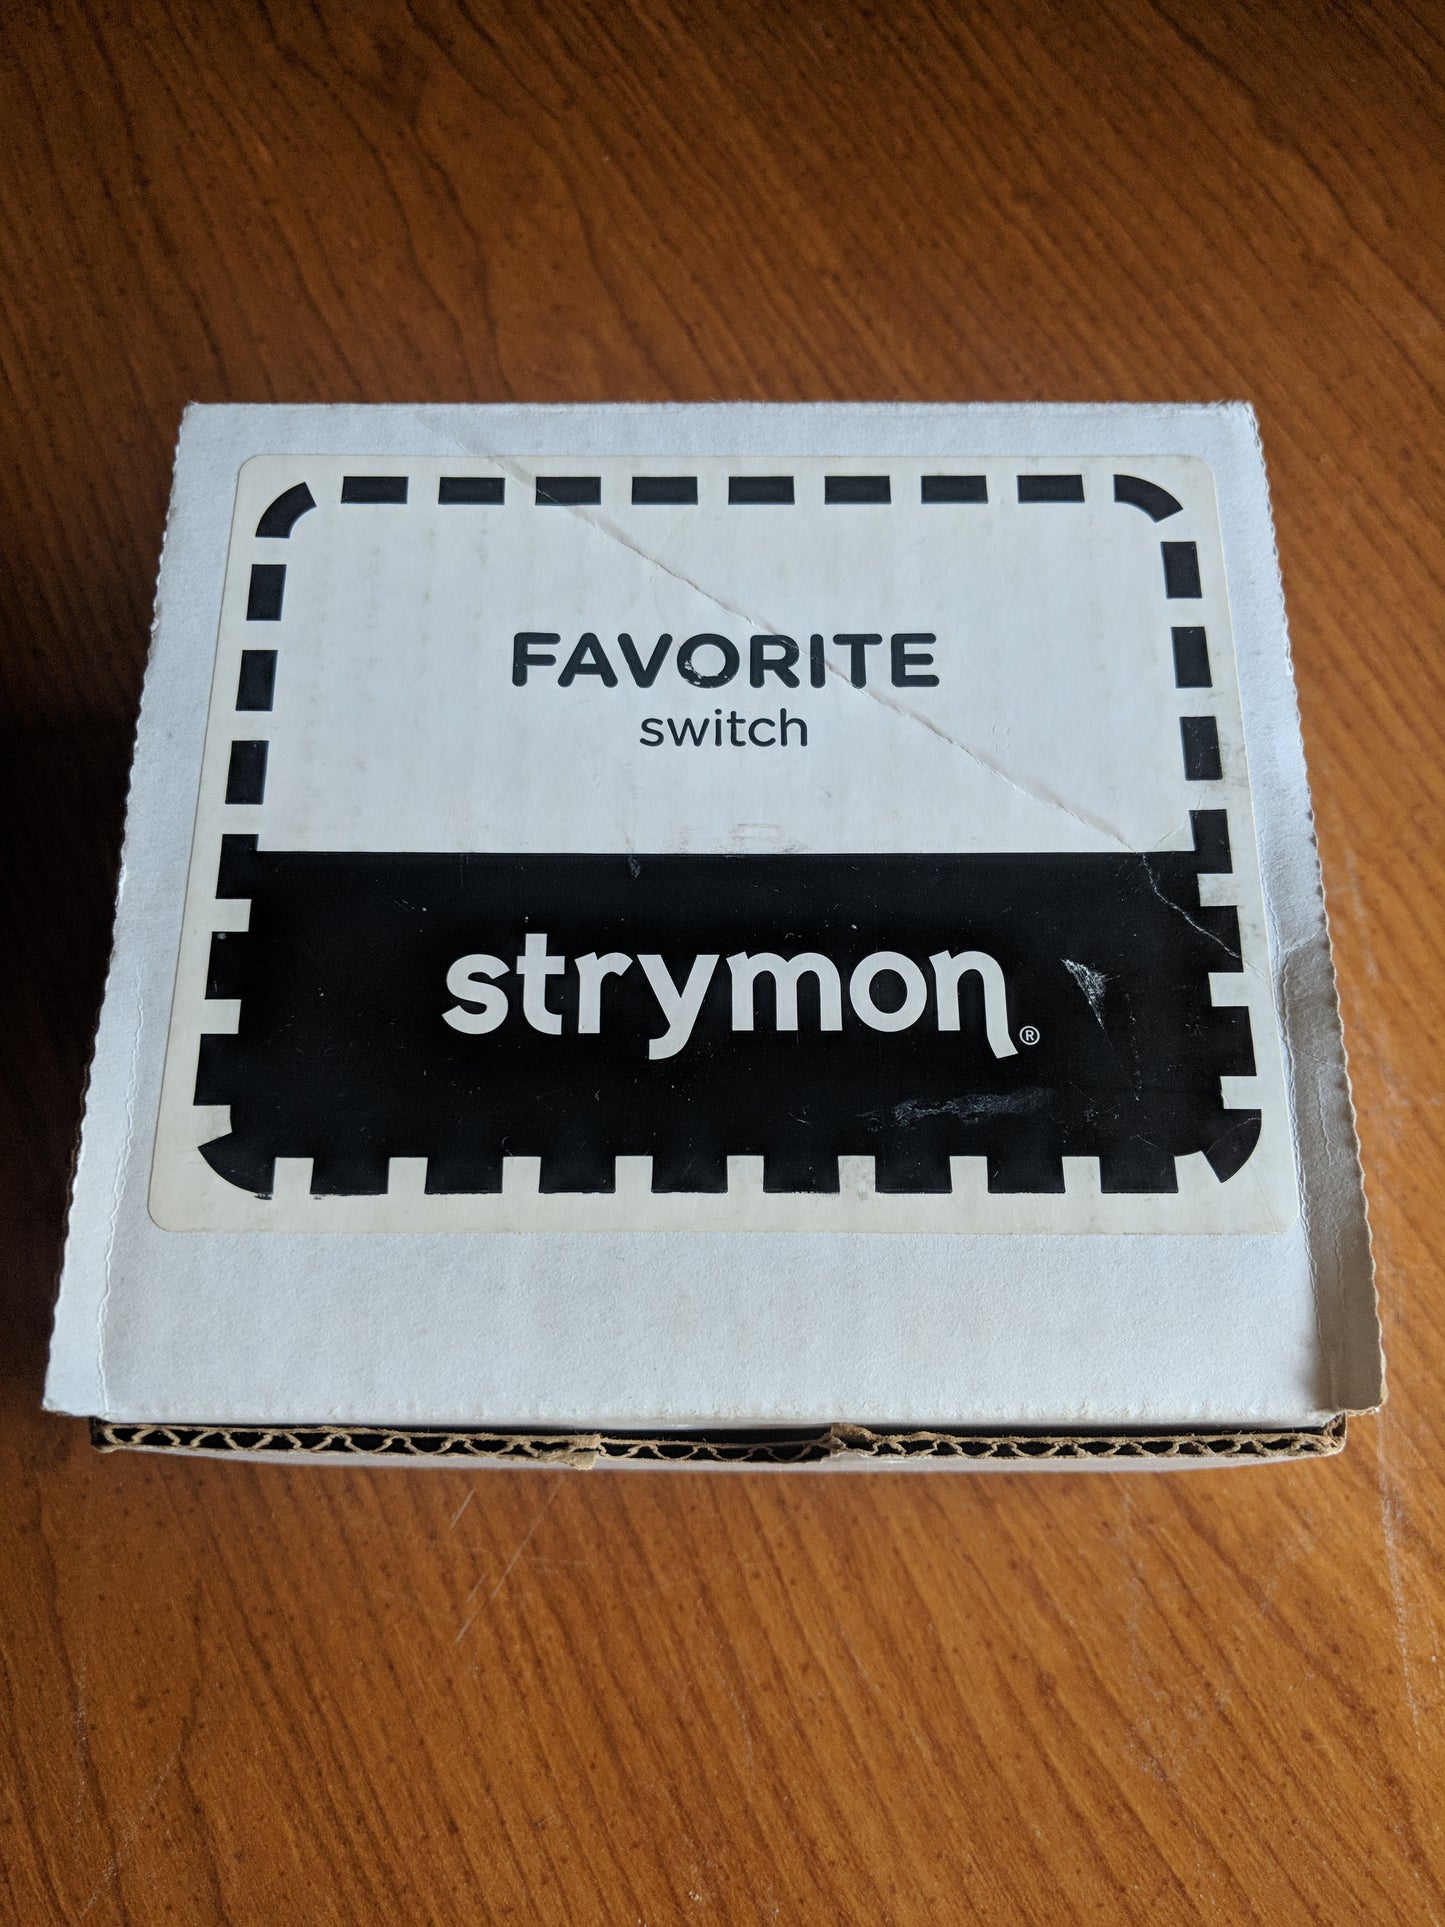 Used Strymon Favorite Switch/Pedal